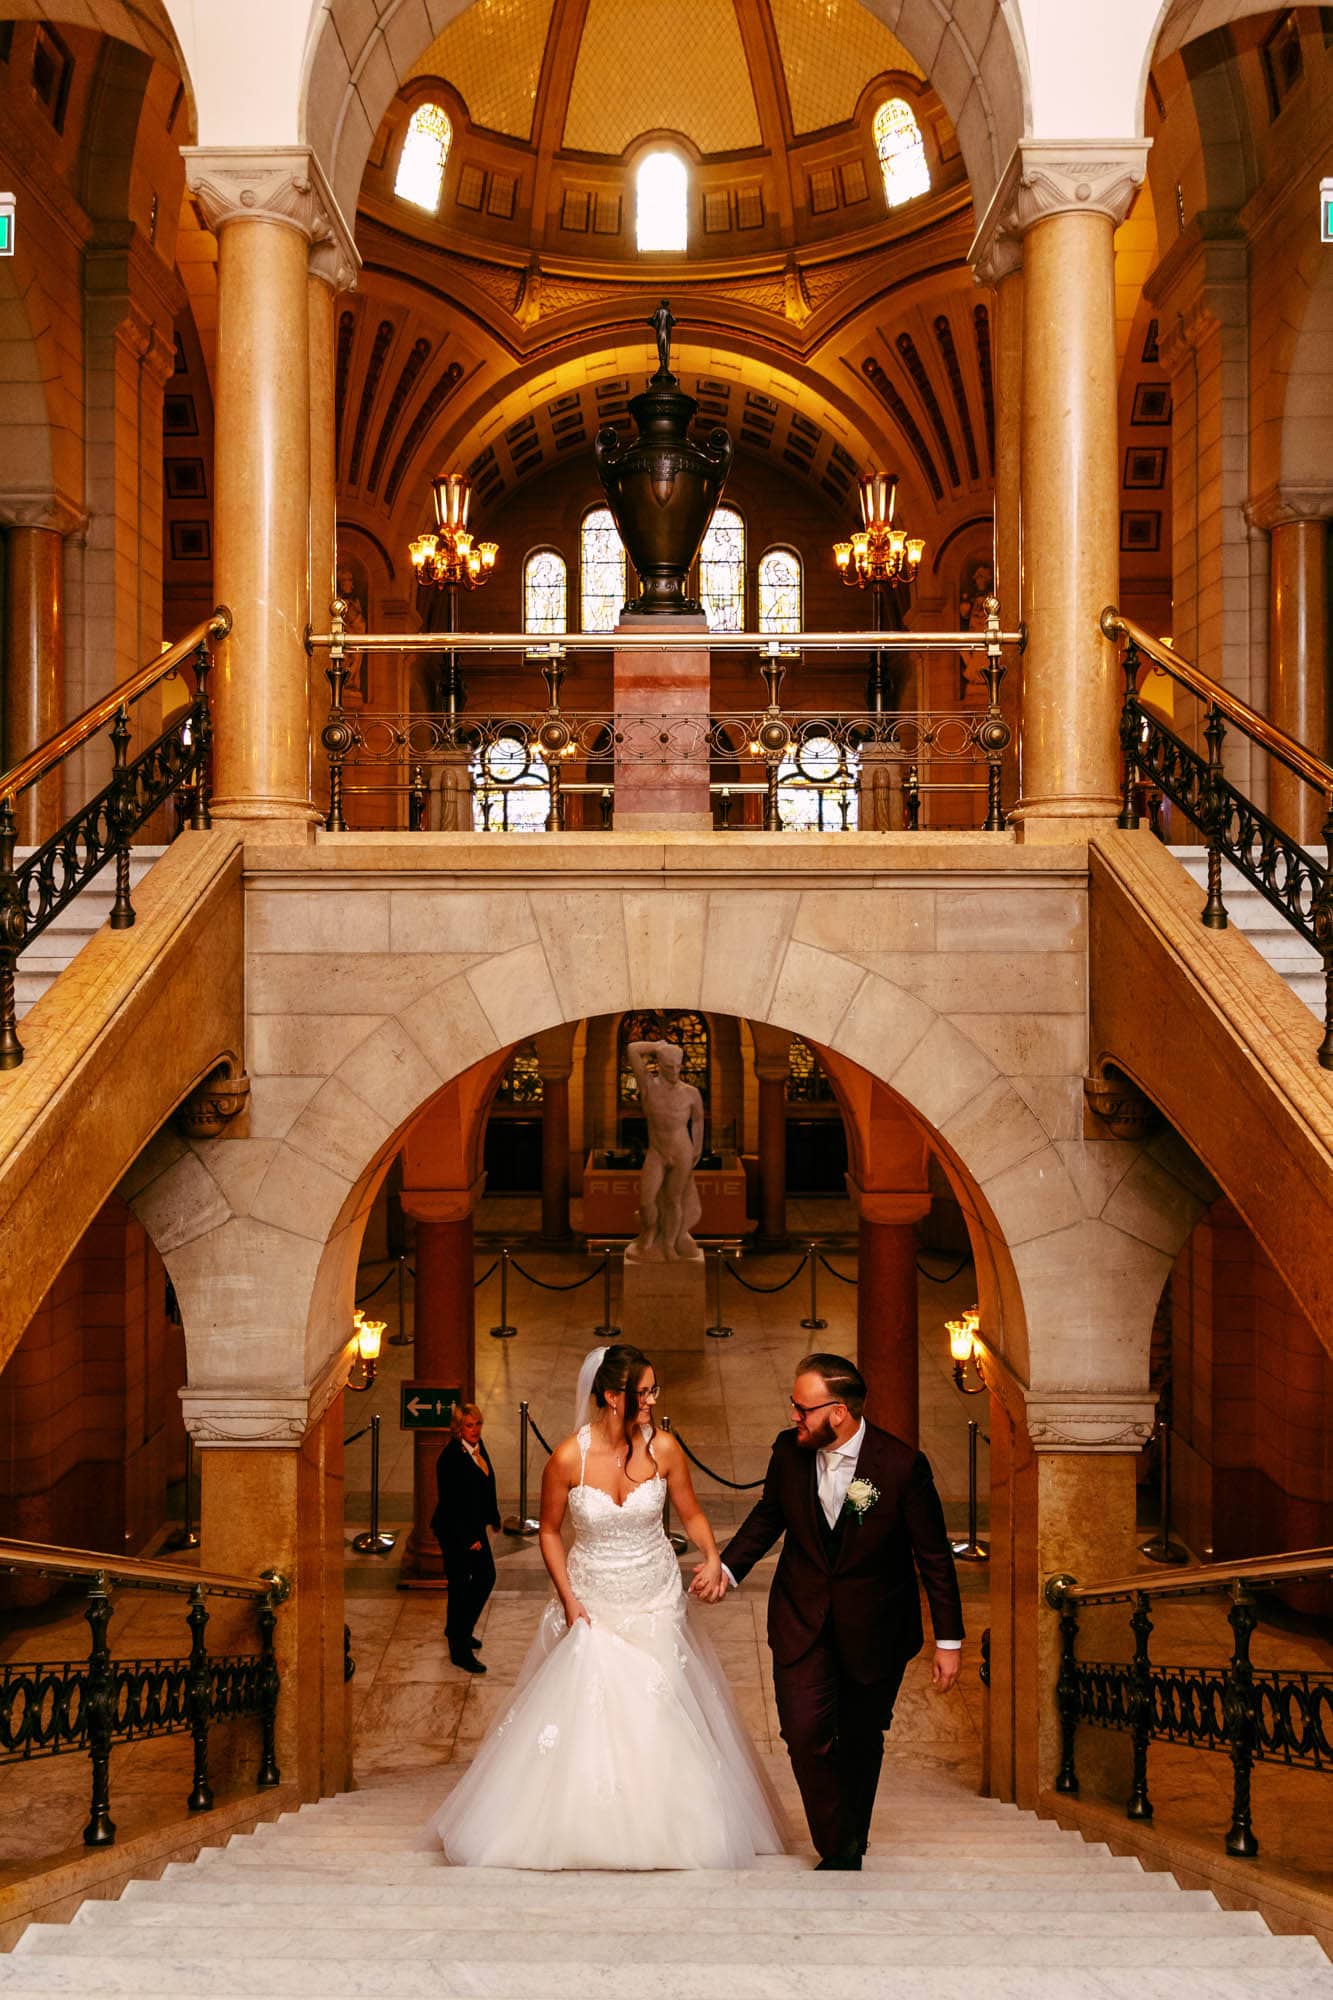 Getting married in Rotterdam - A bride and groom gracefully descend the stairs in a beautiful building.